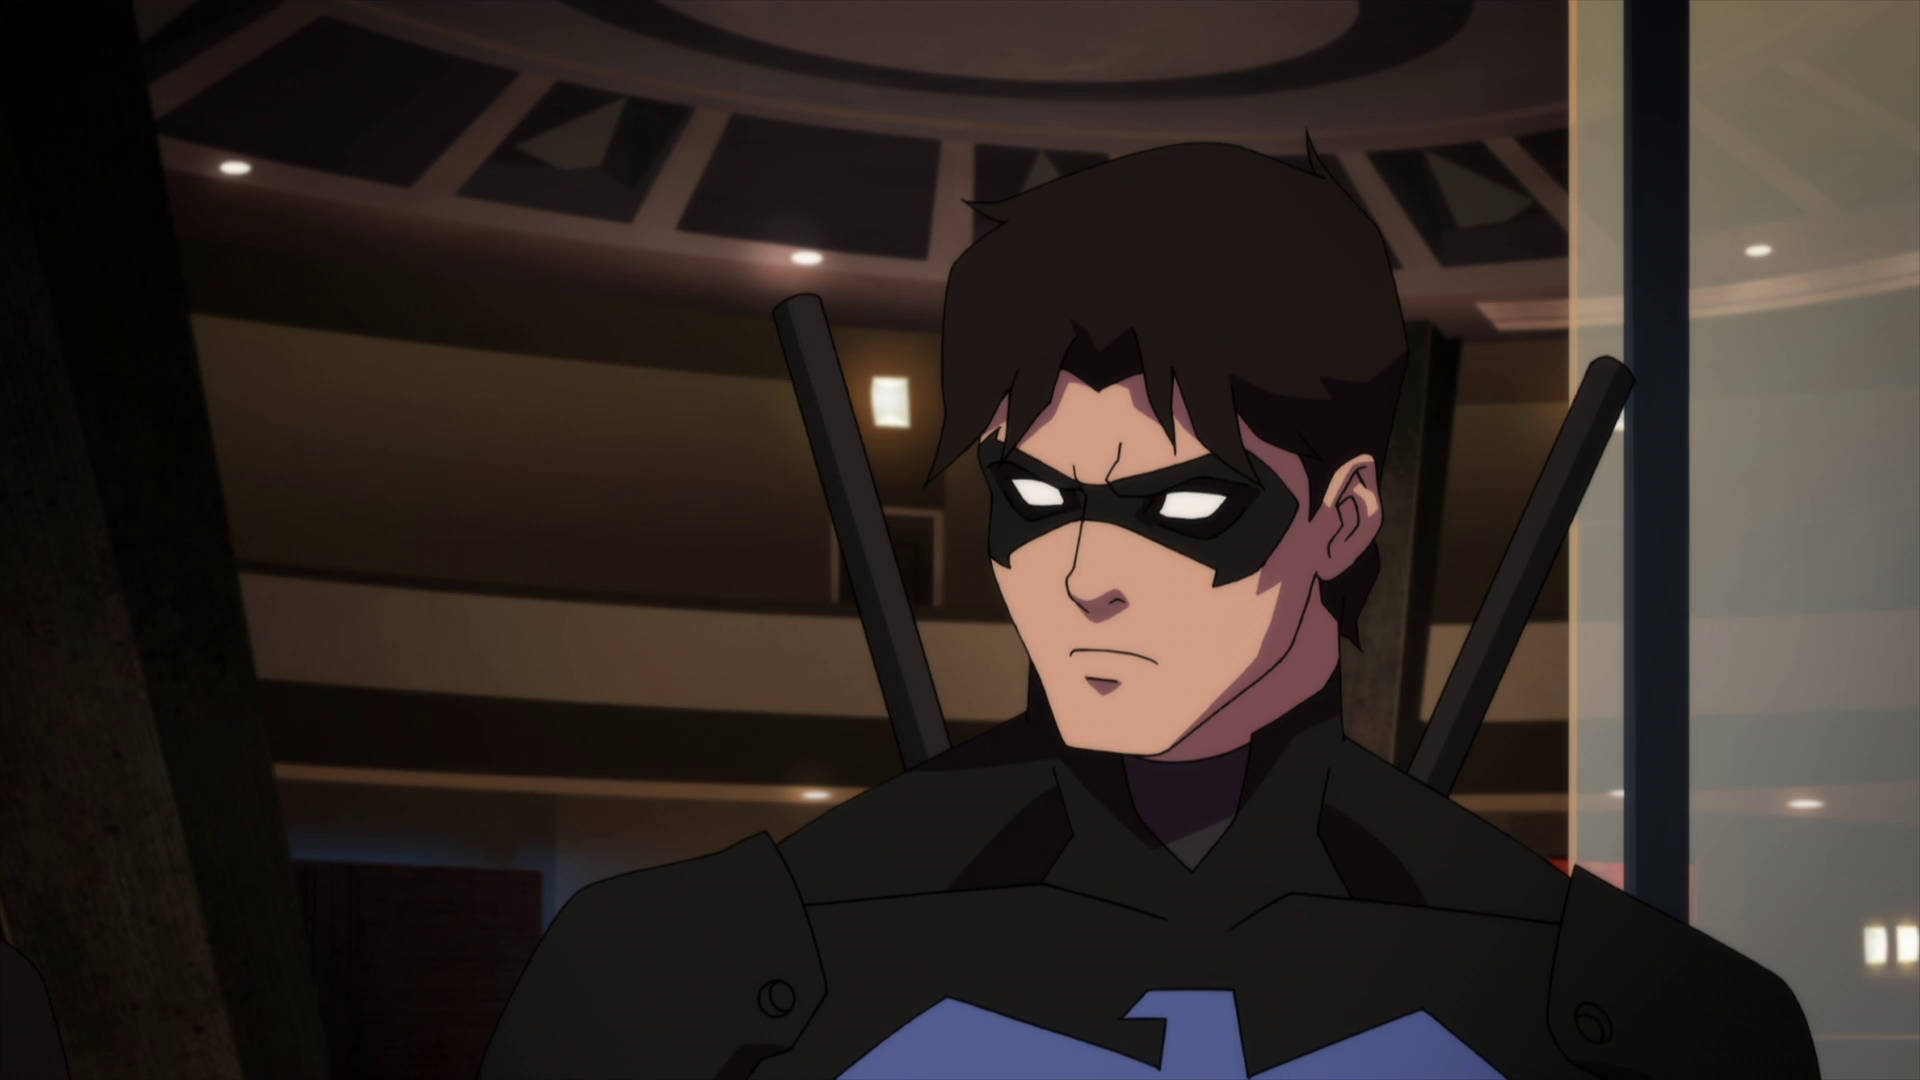 nightwing young justice gif